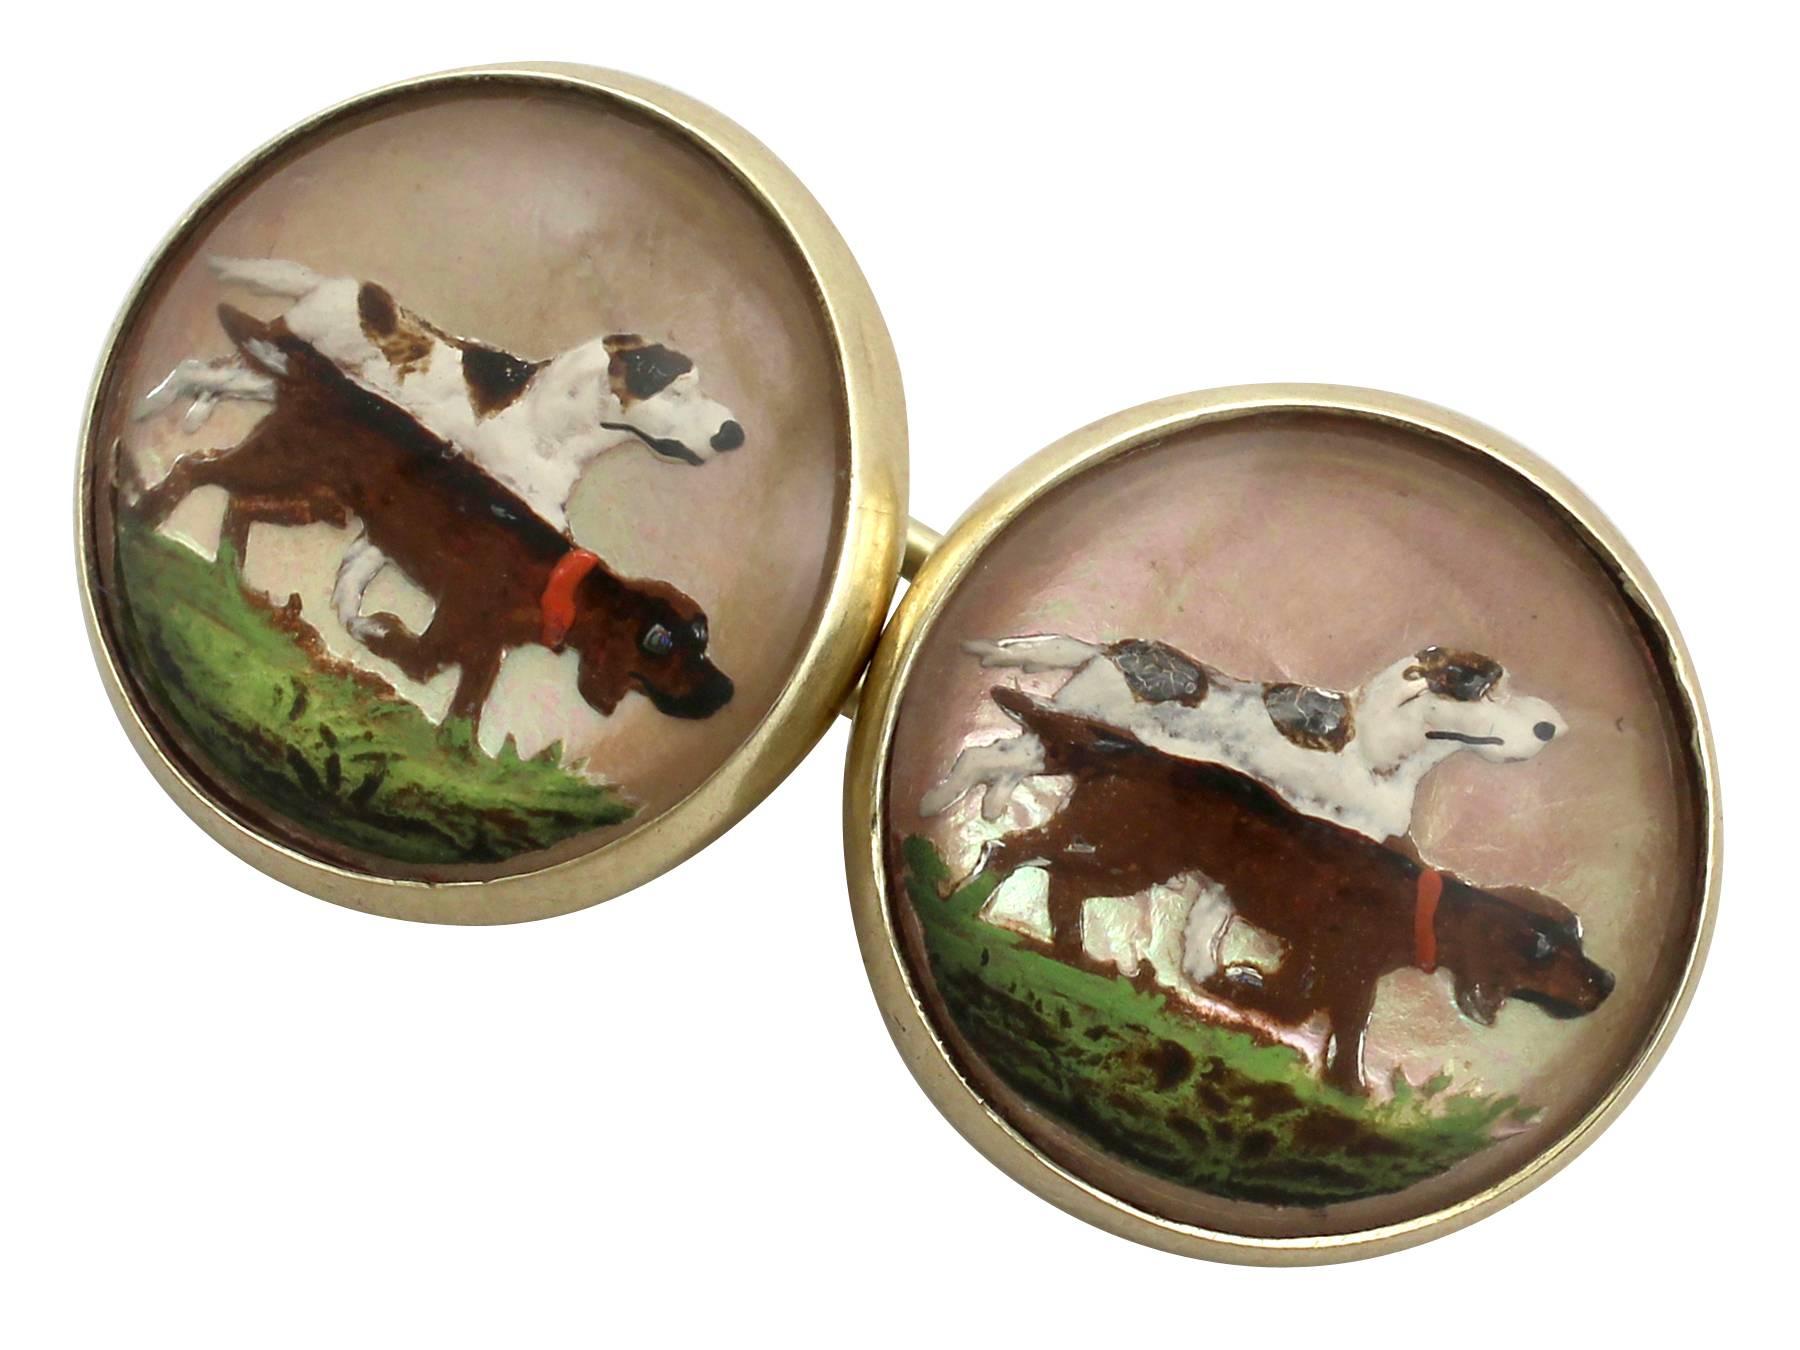 A fine and impressive pair of Victorian essex crystal and 14 karat yellow gold 'English Pointer Dog' cufflinks; part of our diverse antique jewelry and estate jewelry collections.

These fine and impressive antique dog cufflinks have been crafted in